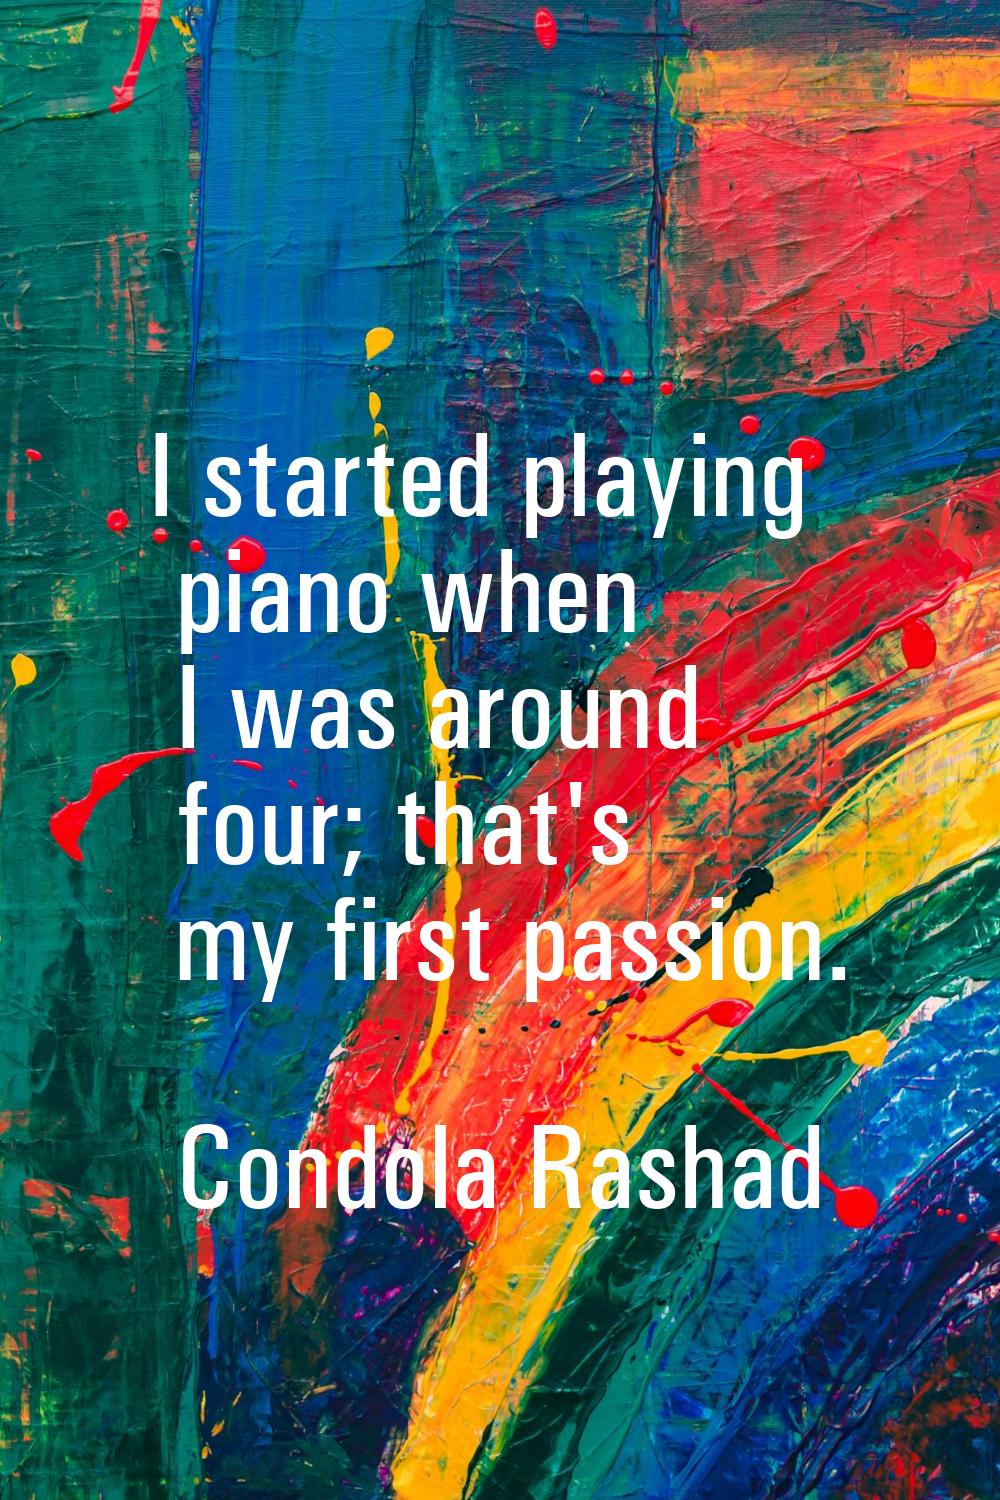 I started playing piano when I was around four; that's my first passion.